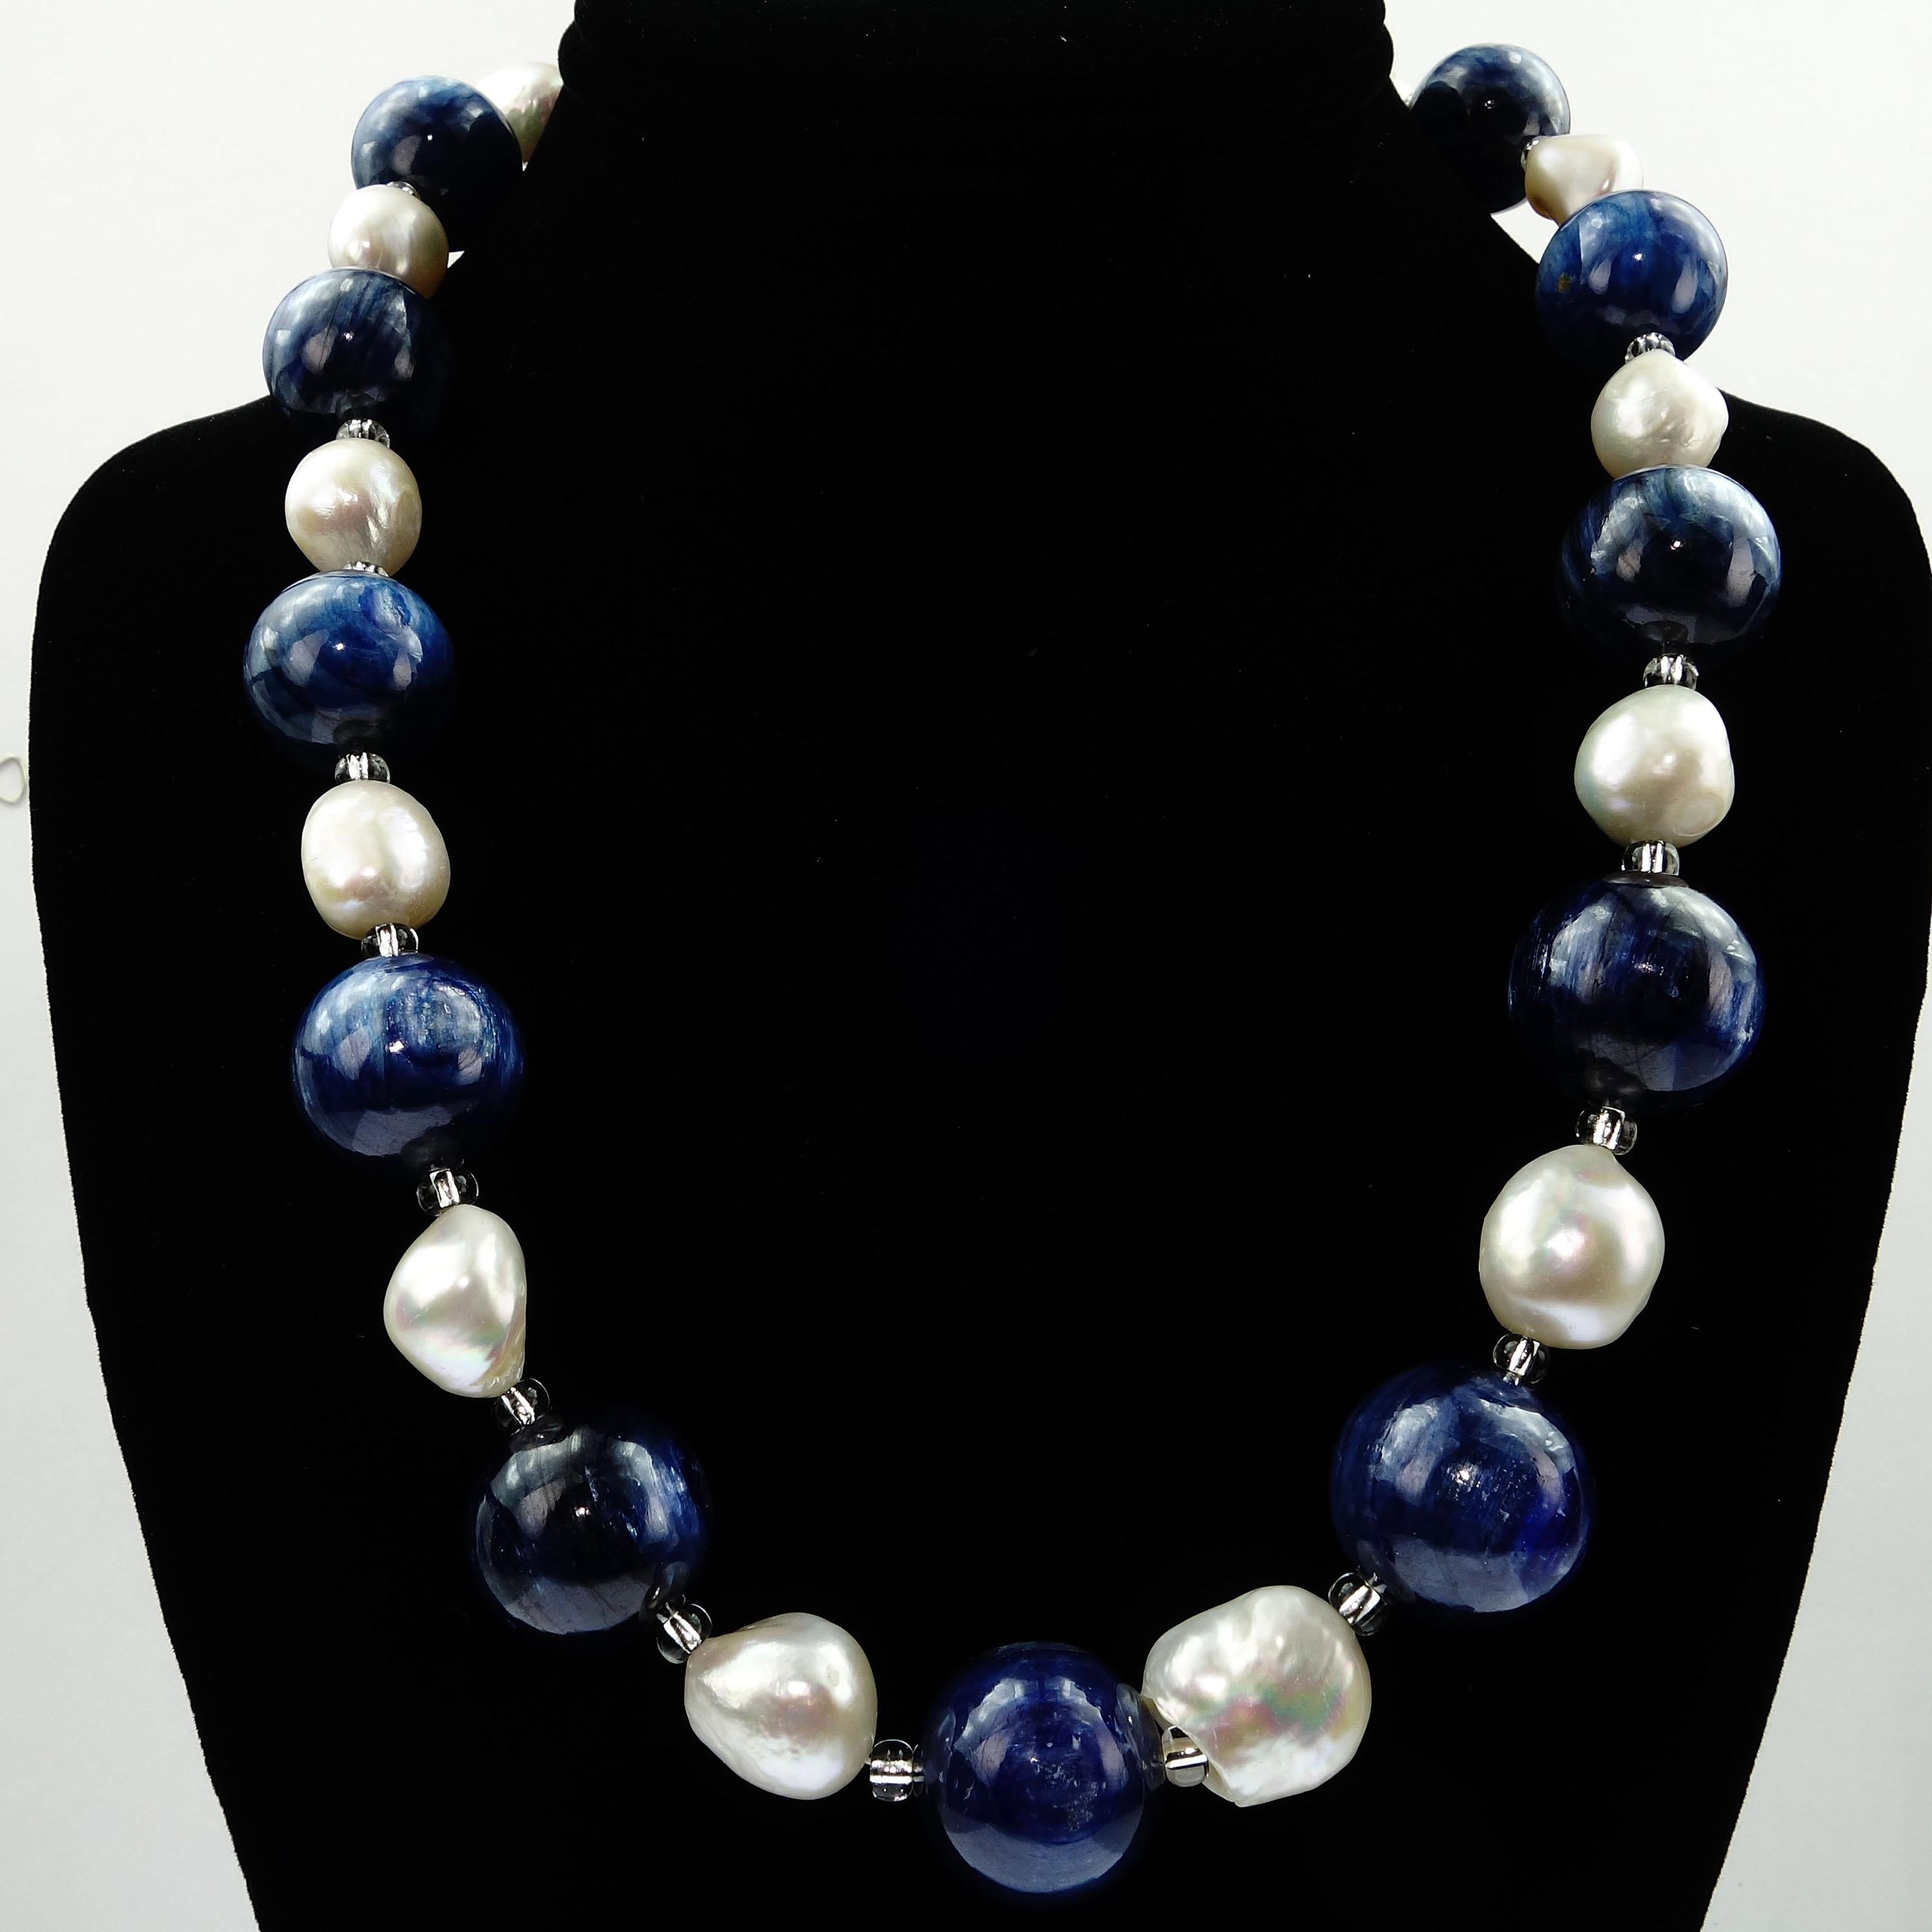 Bead AJD Statement Blue Kyanite and White Baroque Pearl Necklace